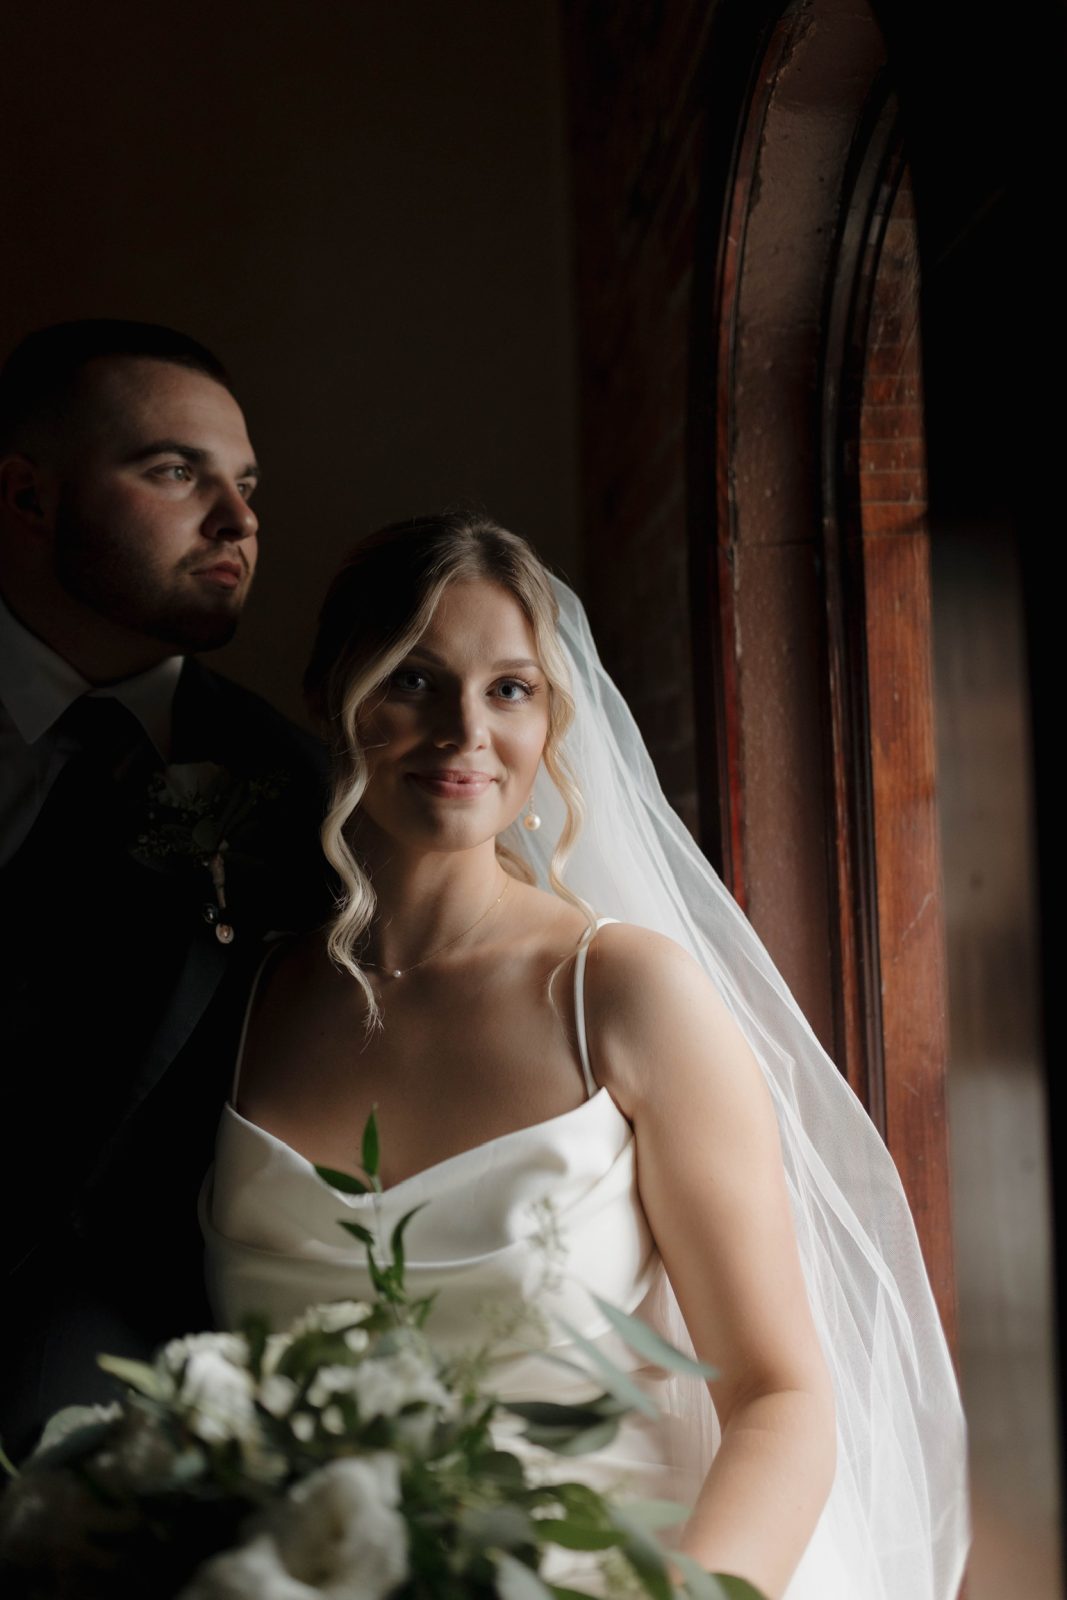 Bride and groom glamour shot after wedding ceremony at Springside Inn's The Point wedding venue